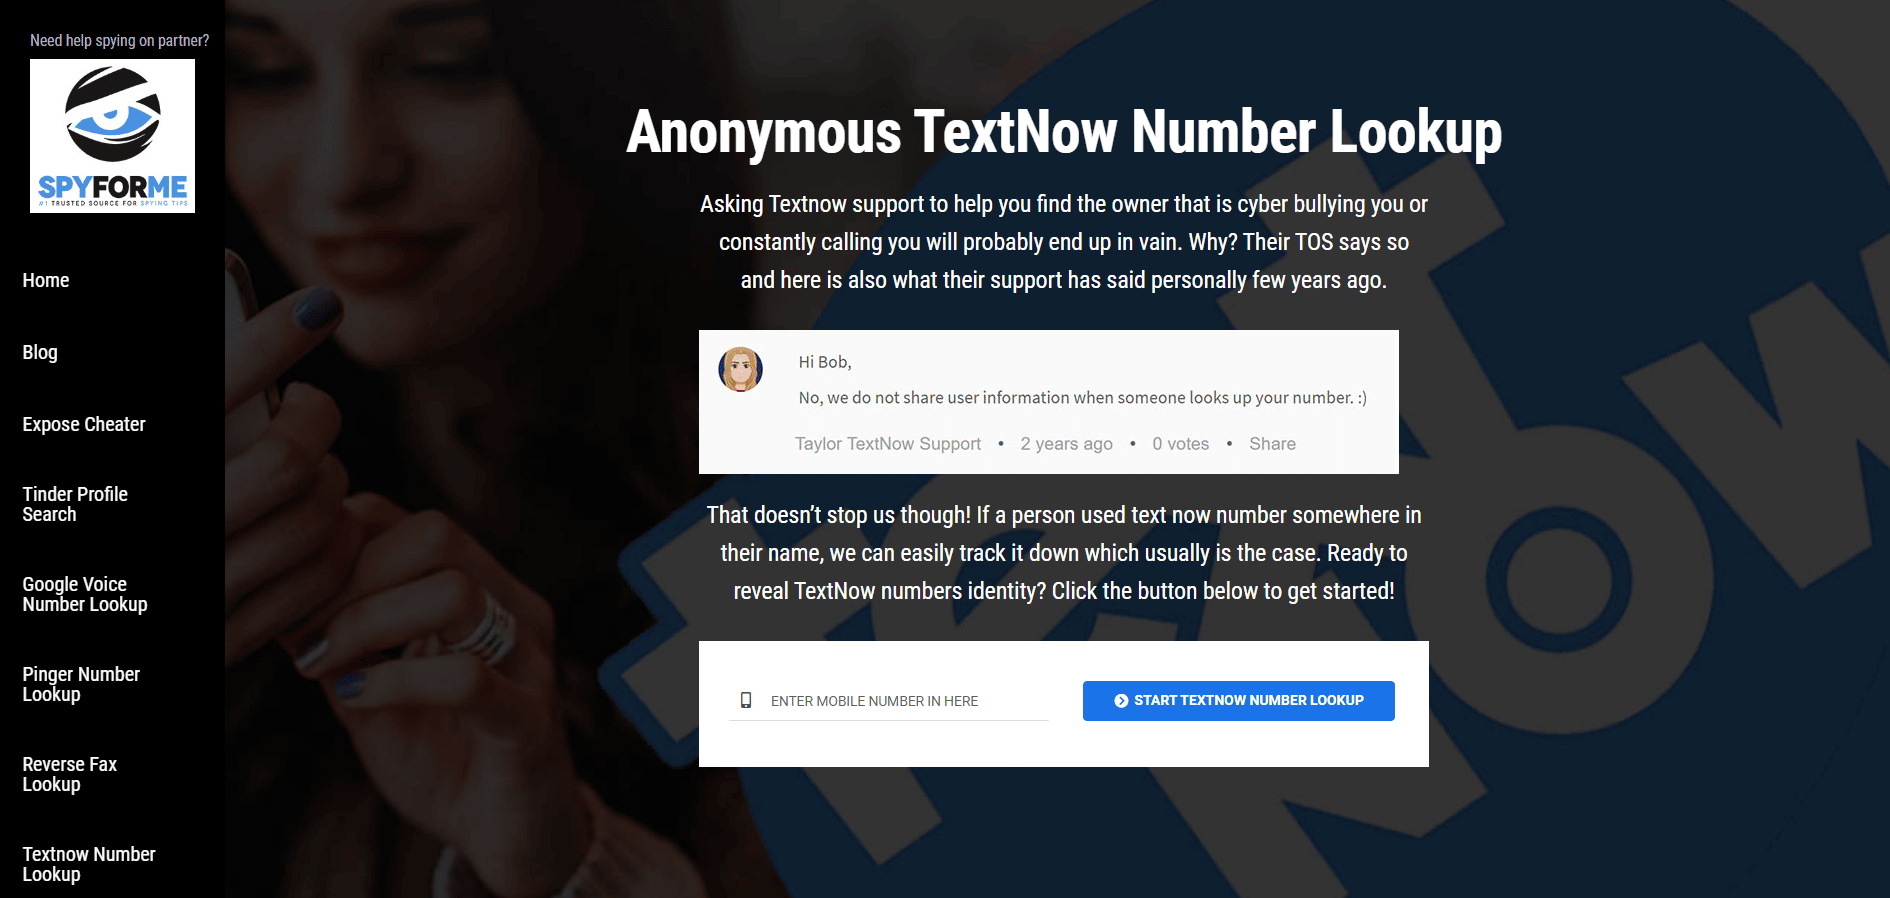 Go to the Anonymous TextNow Number Lookup tool on a browser.